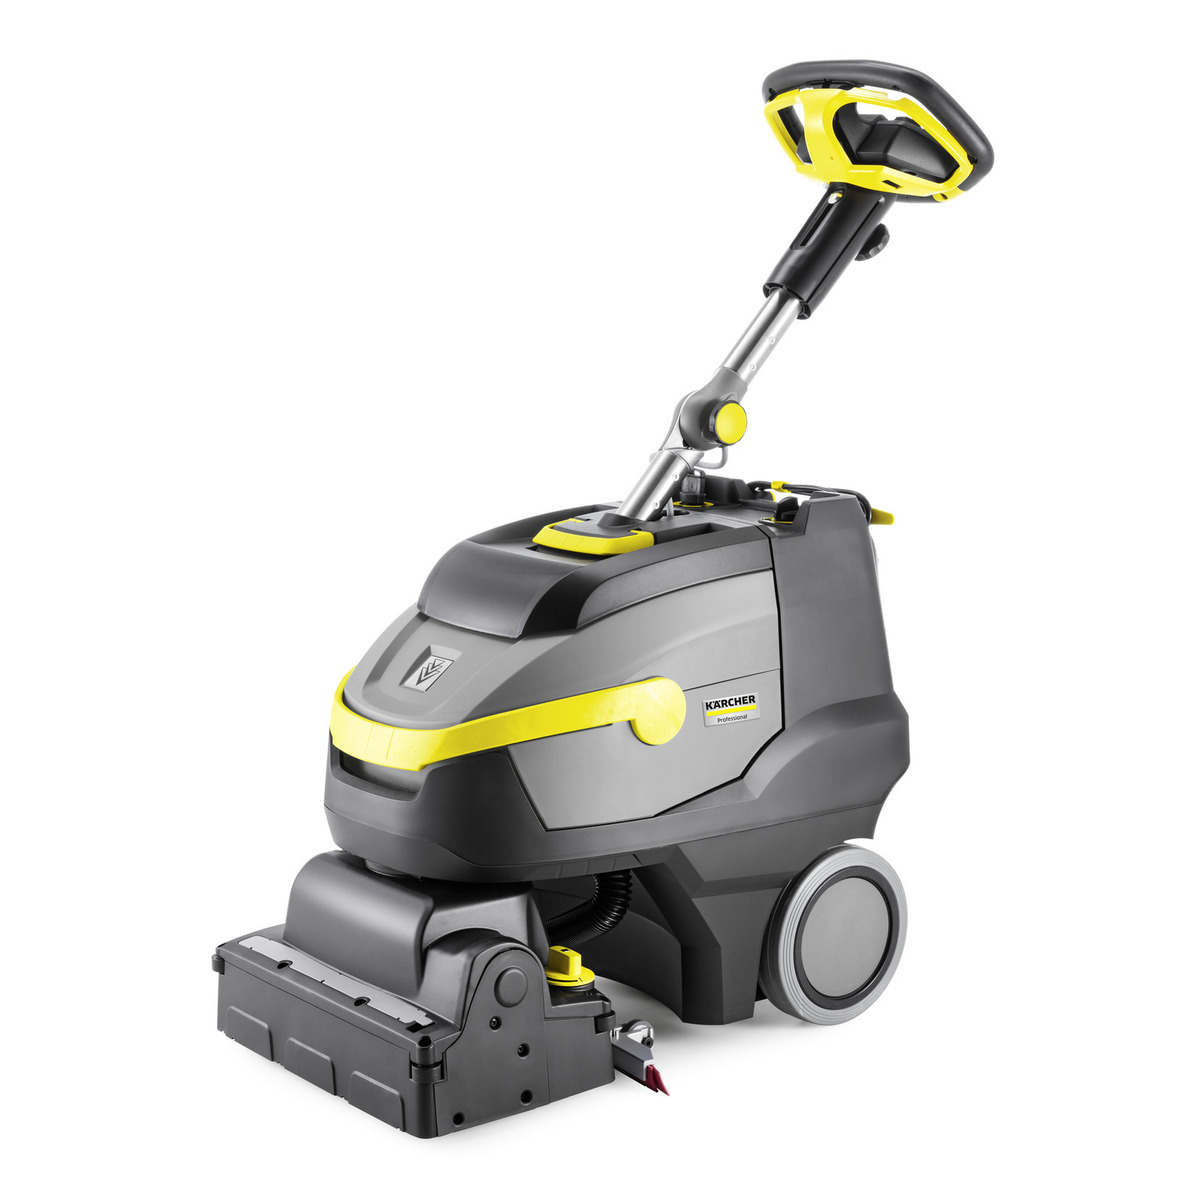 Karcher BR 35/12 Auto Scrubber karcher, BR, 35/12, auto, scrubber, auto-scrubber, floor, machine commercial, professional, janitorial, walk-behind, easy, effective, clean, cleaner, 